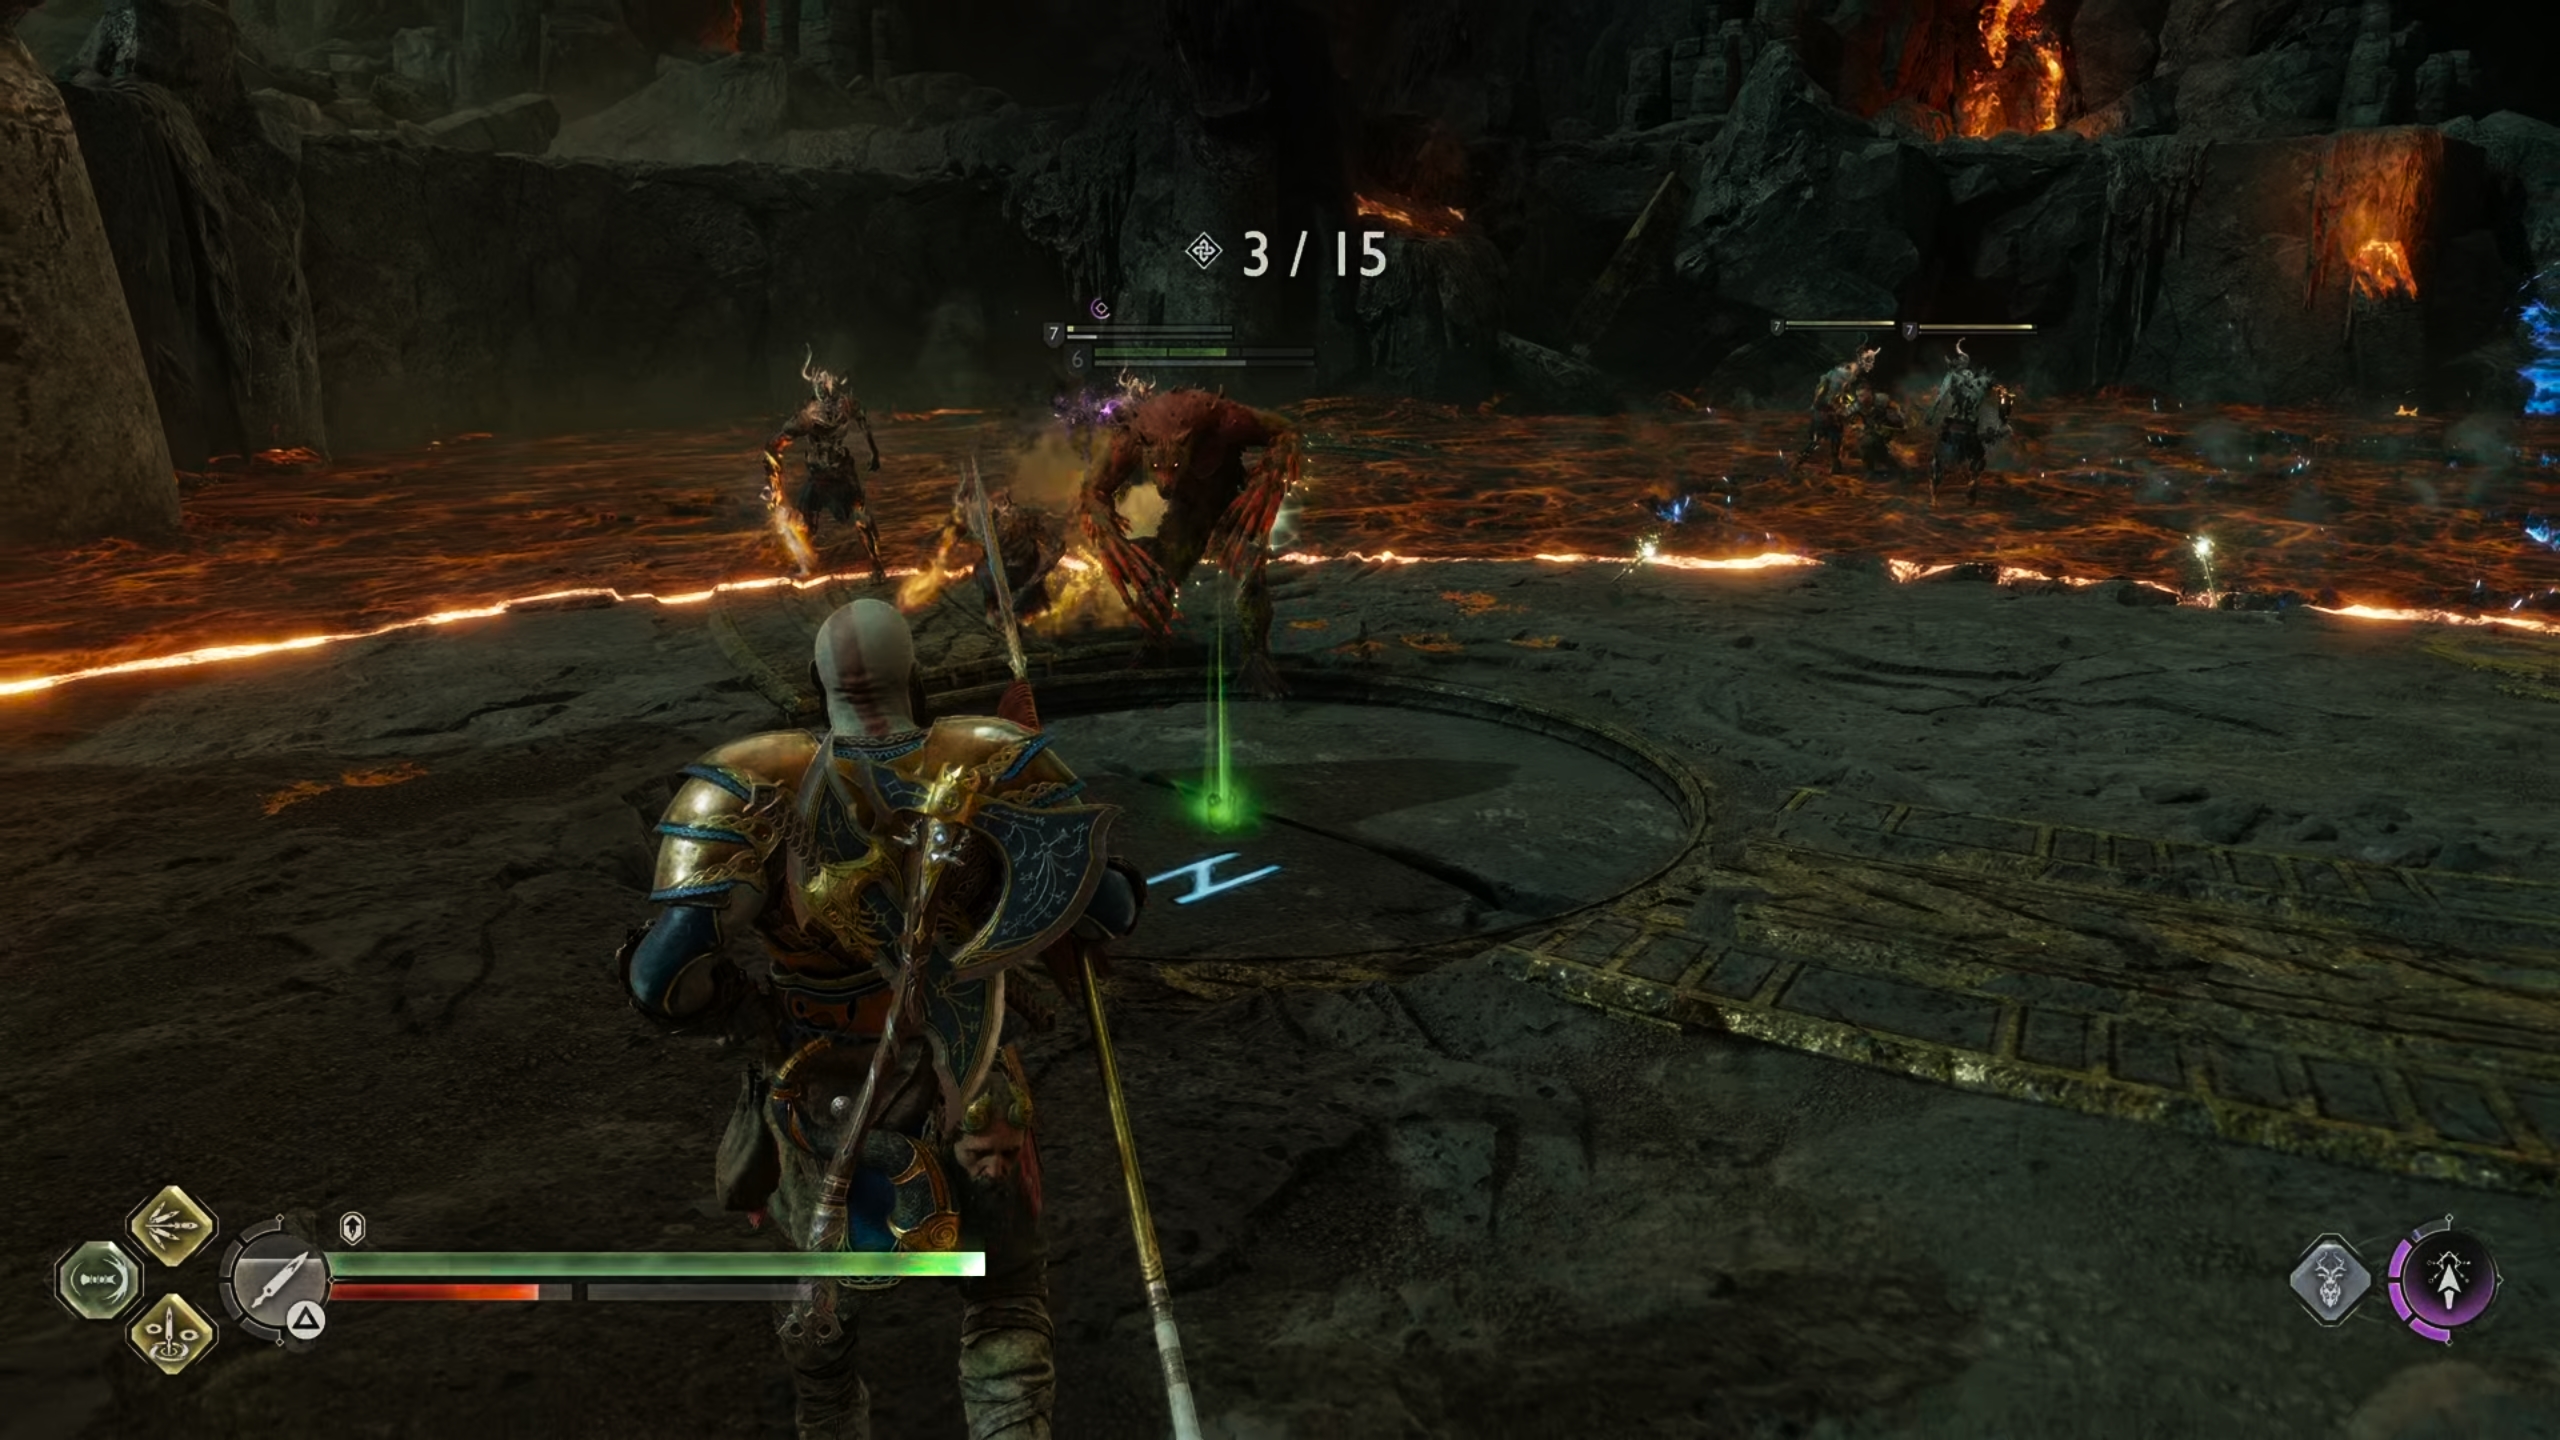 Try to goad enemies into the ring before killing them, even if your companion is outside the ring.